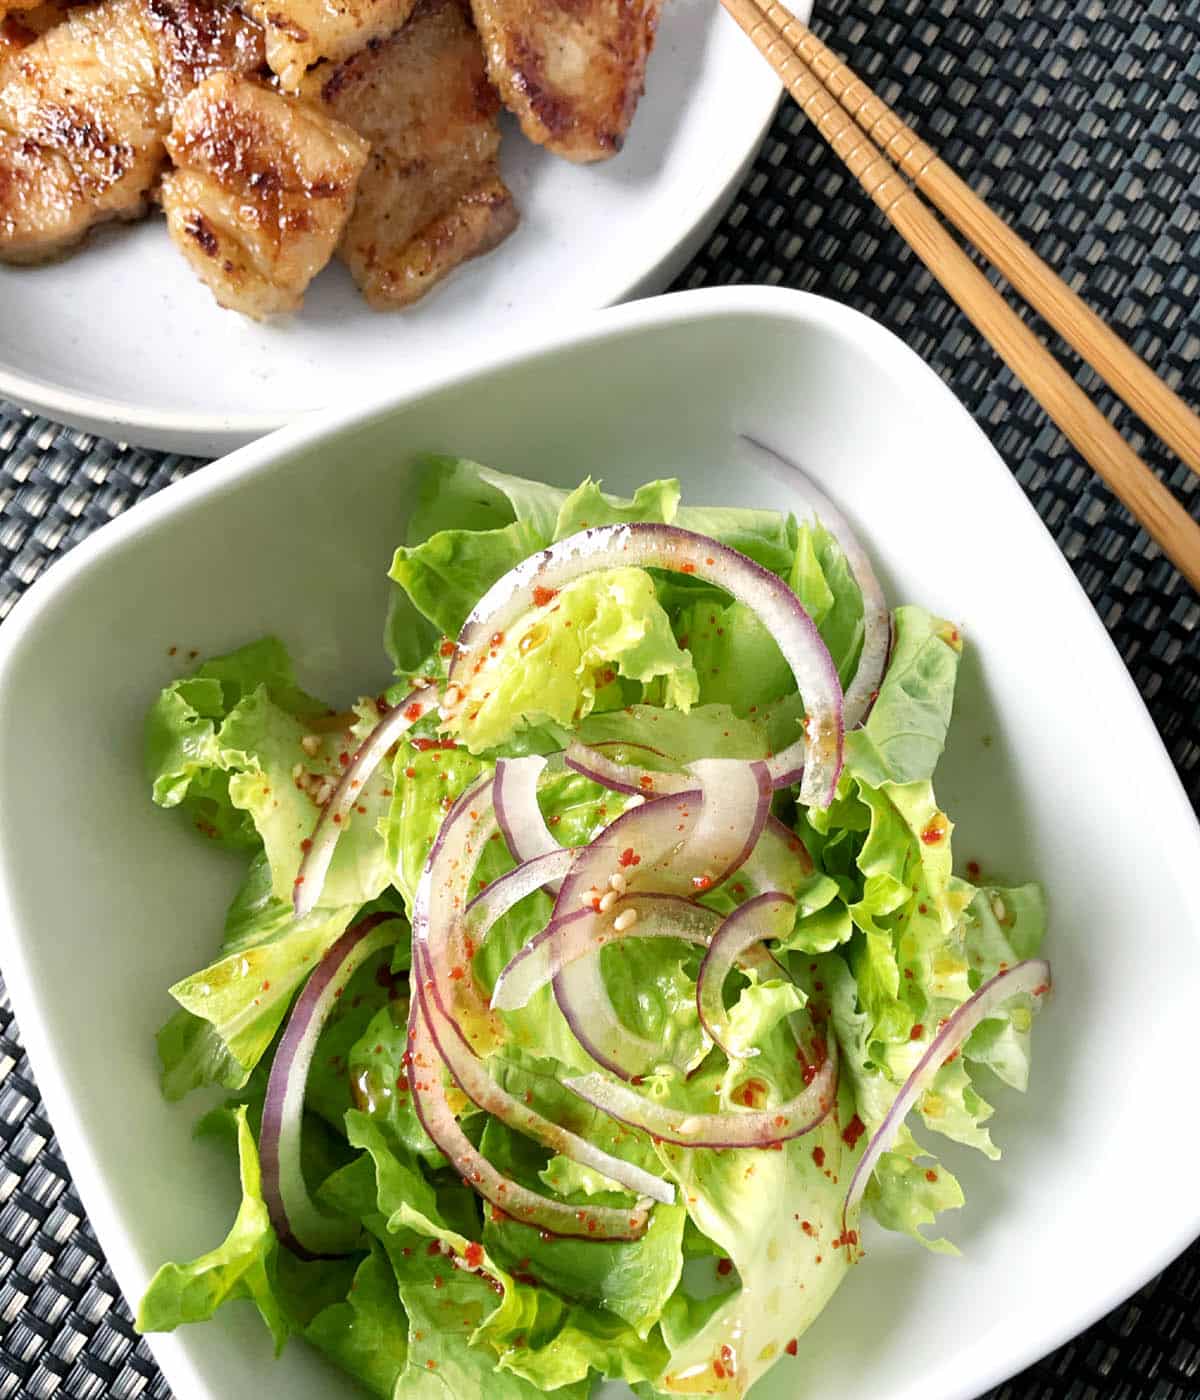 A square white dish containing Korean lettuce salad with thinly sliced red onions and red pepper flakes.